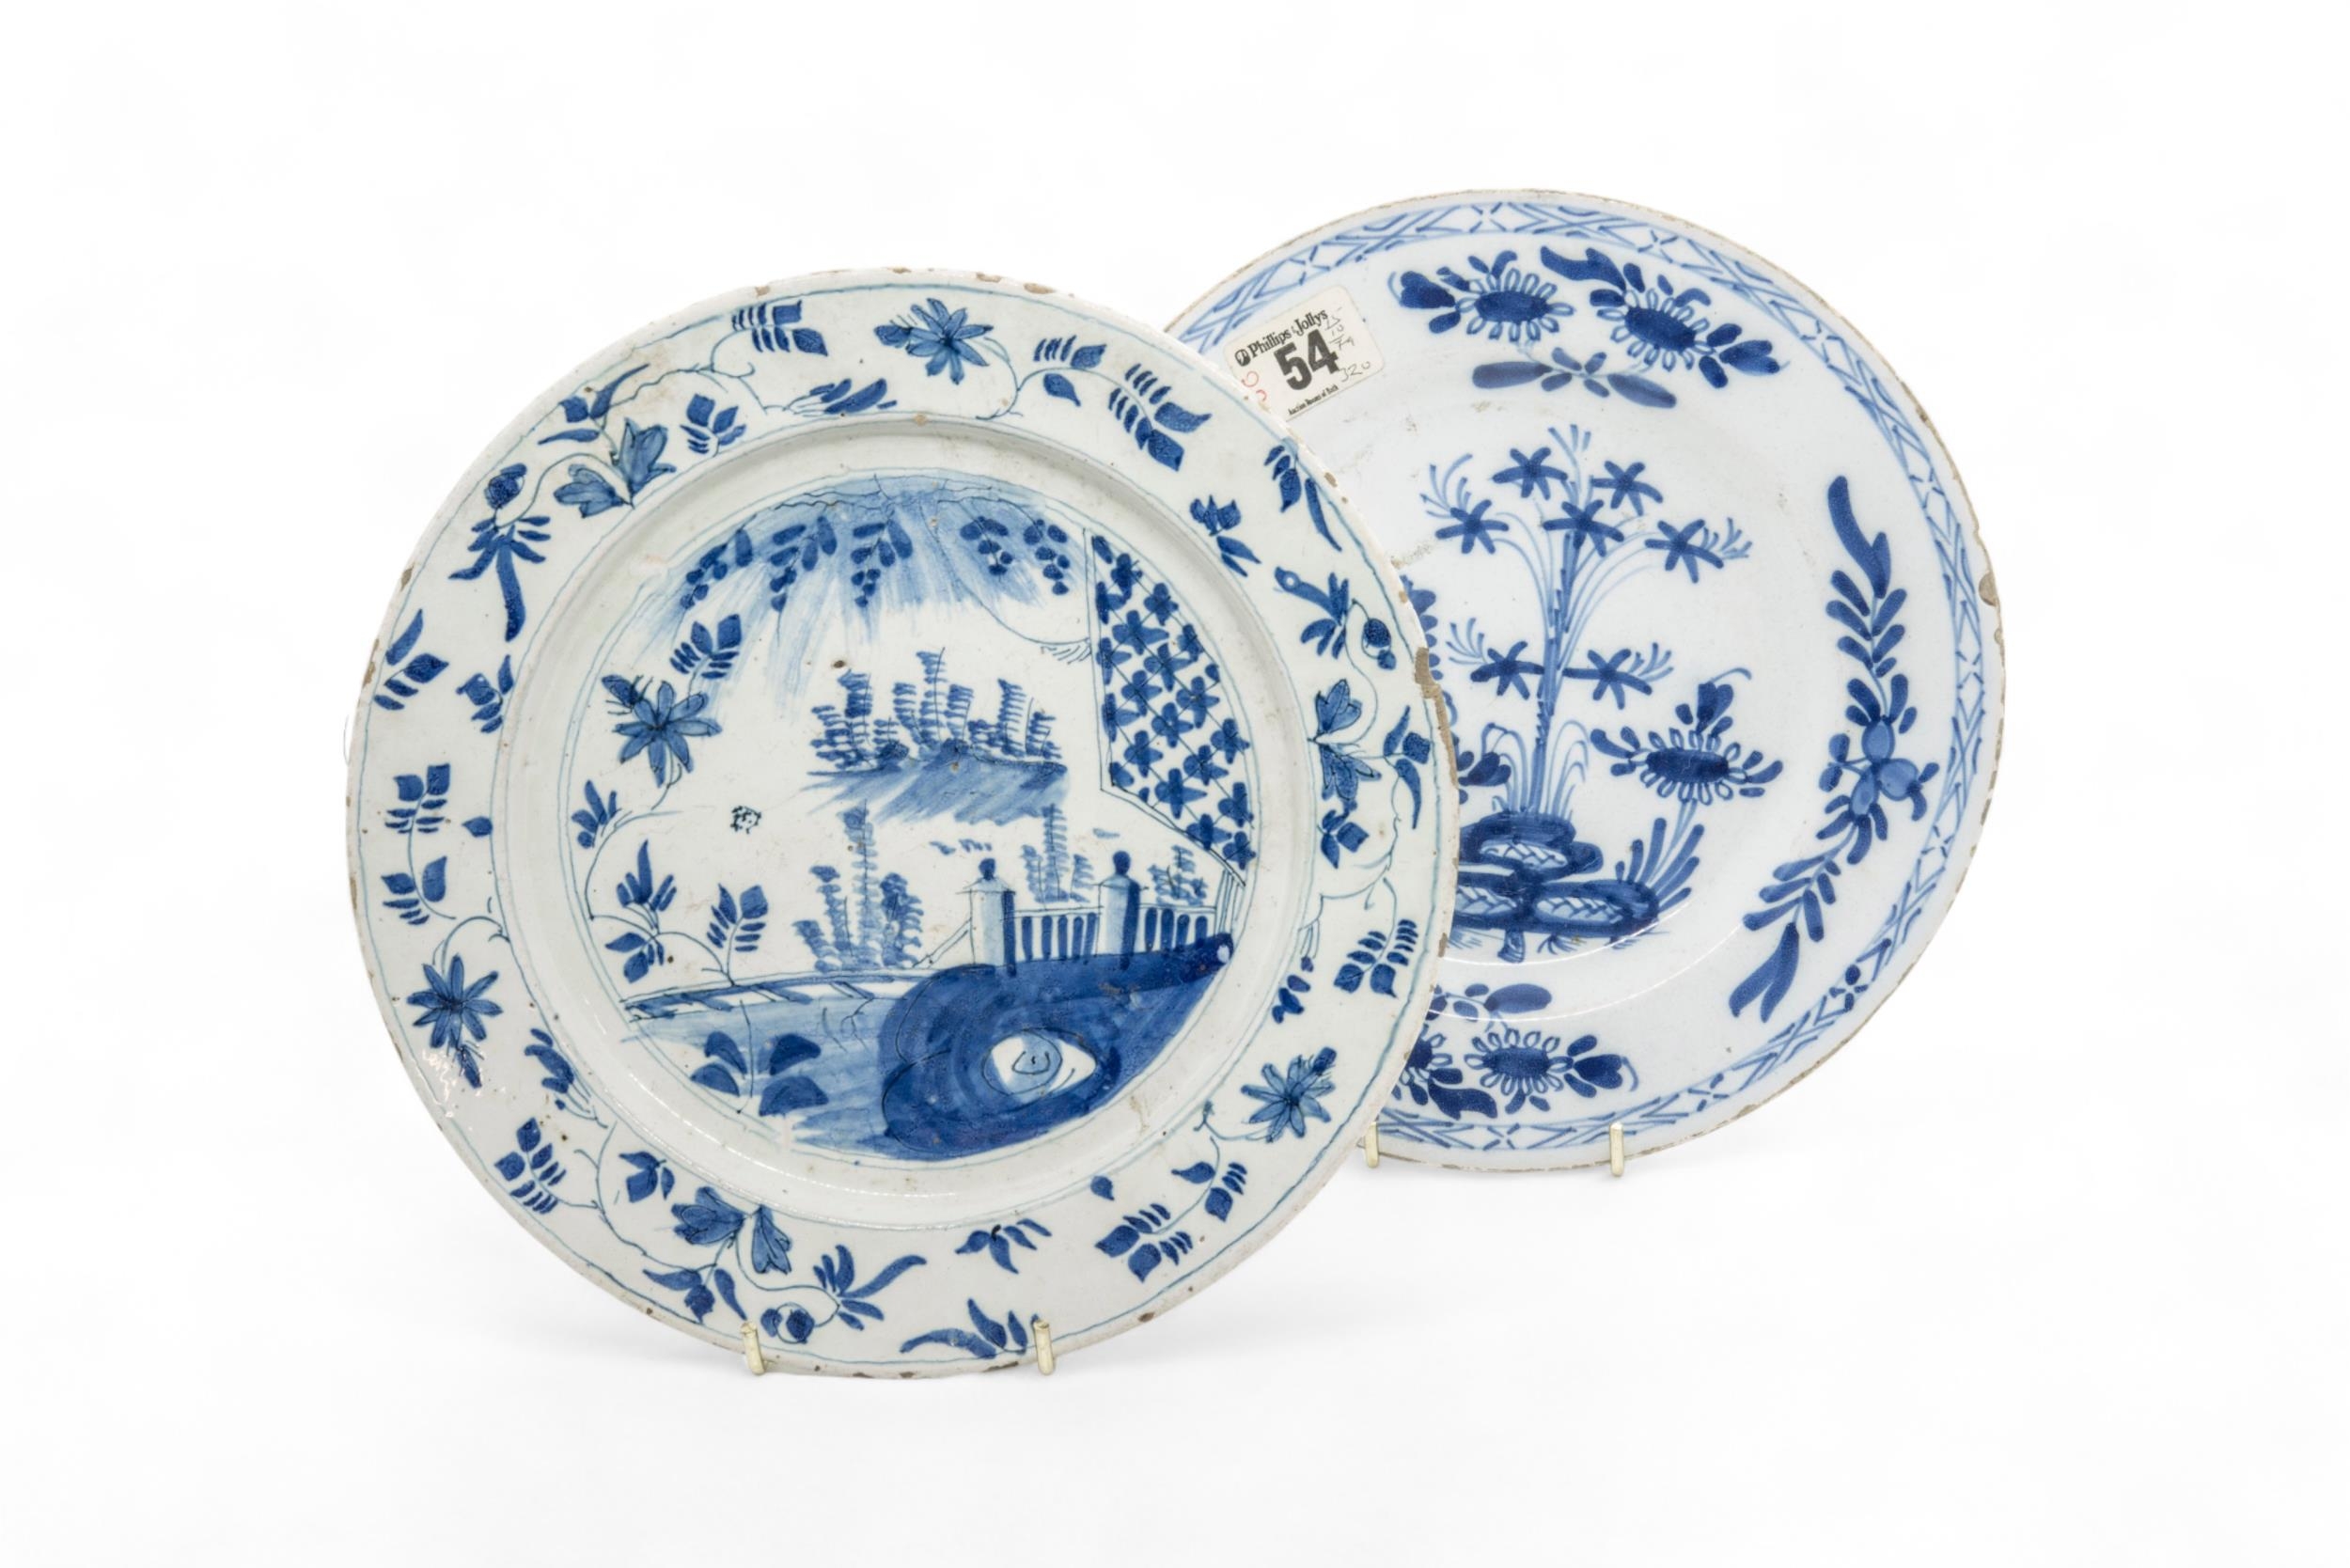 A LATE 17TH / 18TH CENTURY LOBED FAIENCE DISH Together with seven 18th century delft plates, 25cms - Image 6 of 6